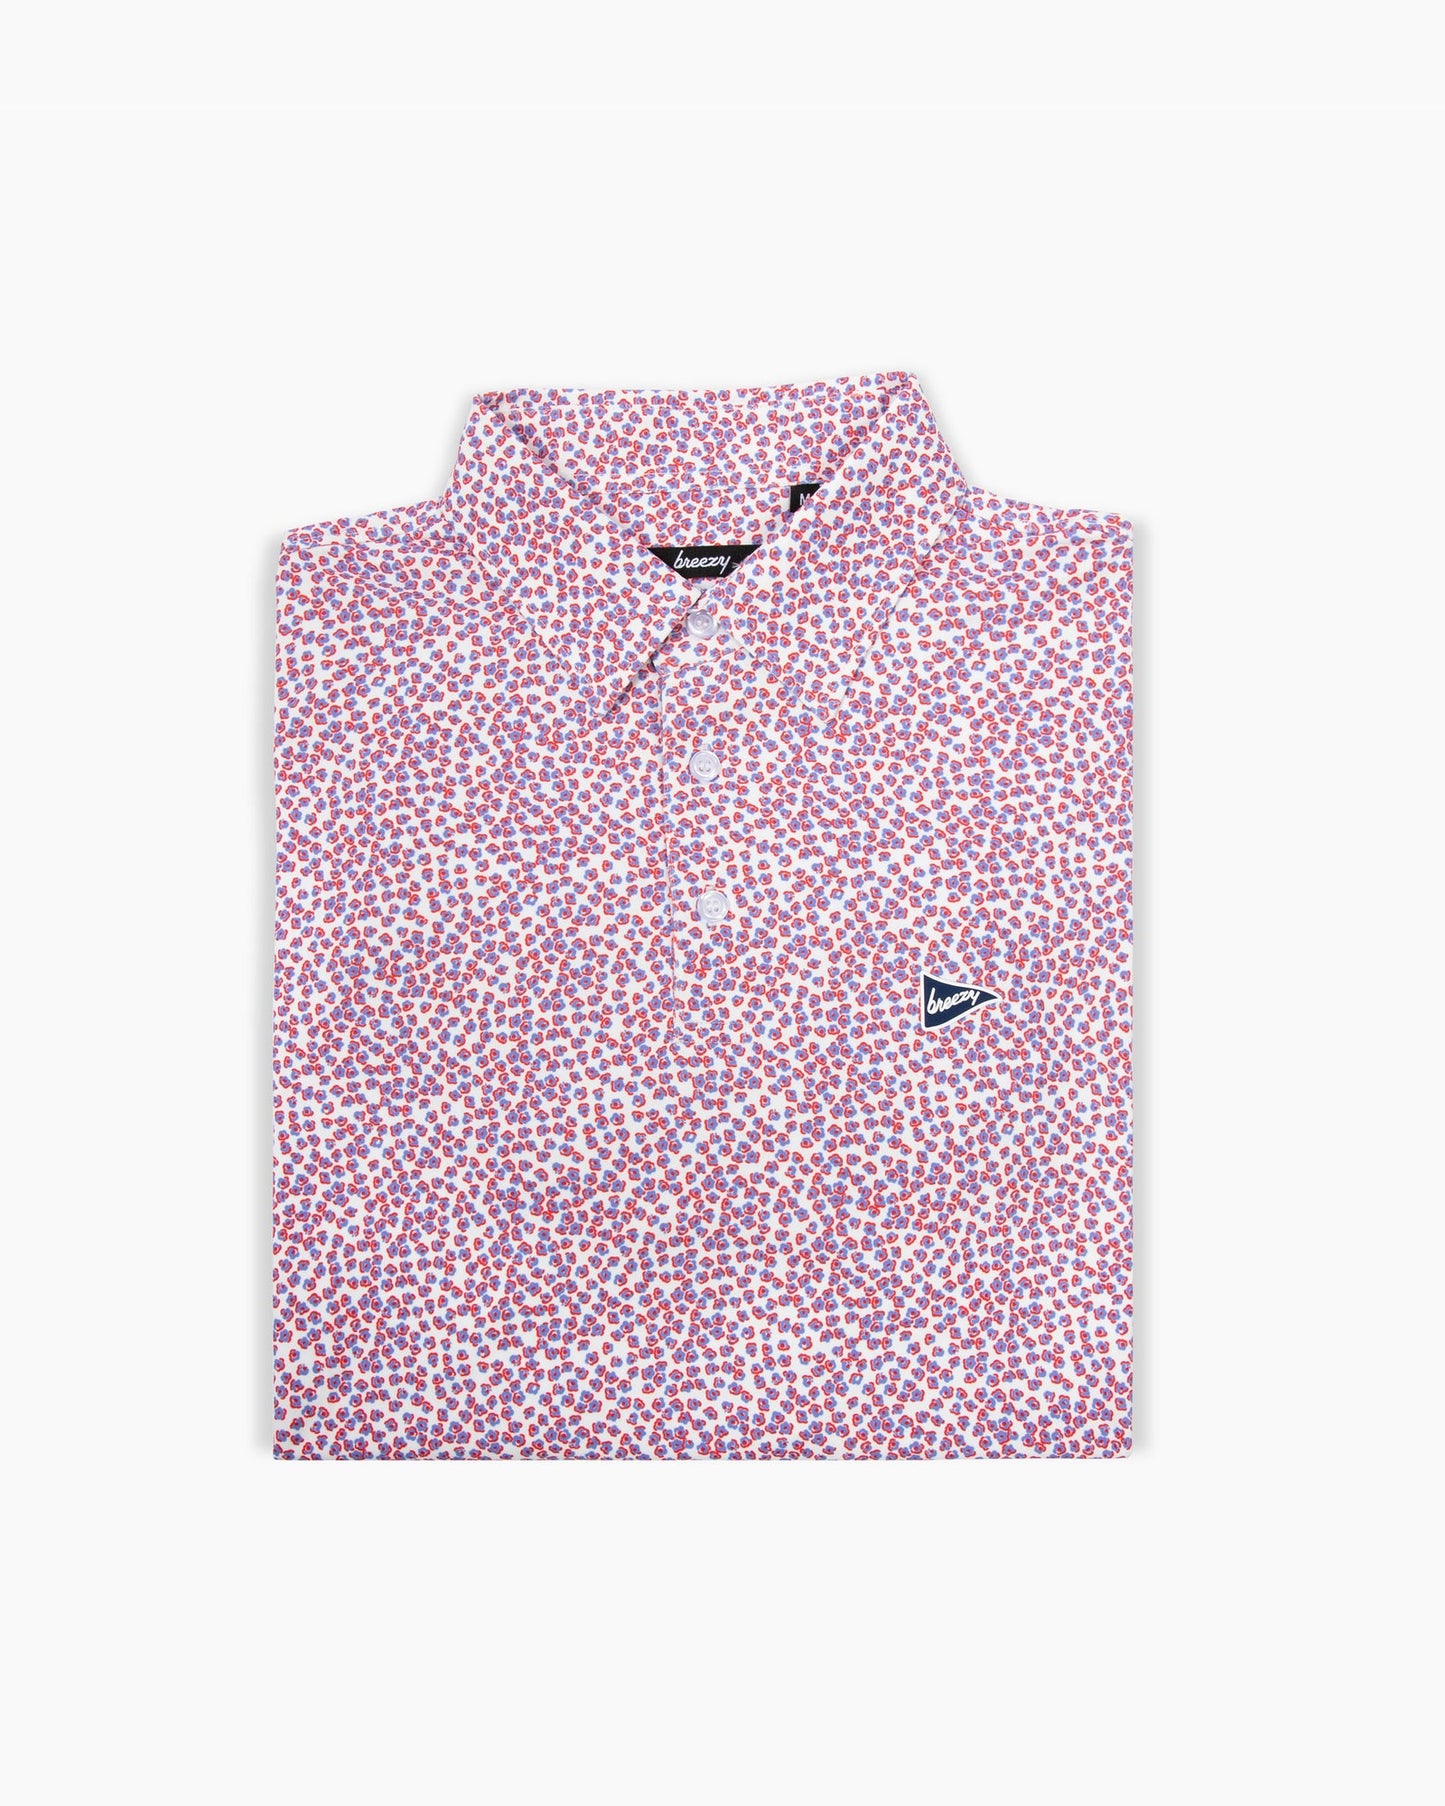 The Flower Petals Polo